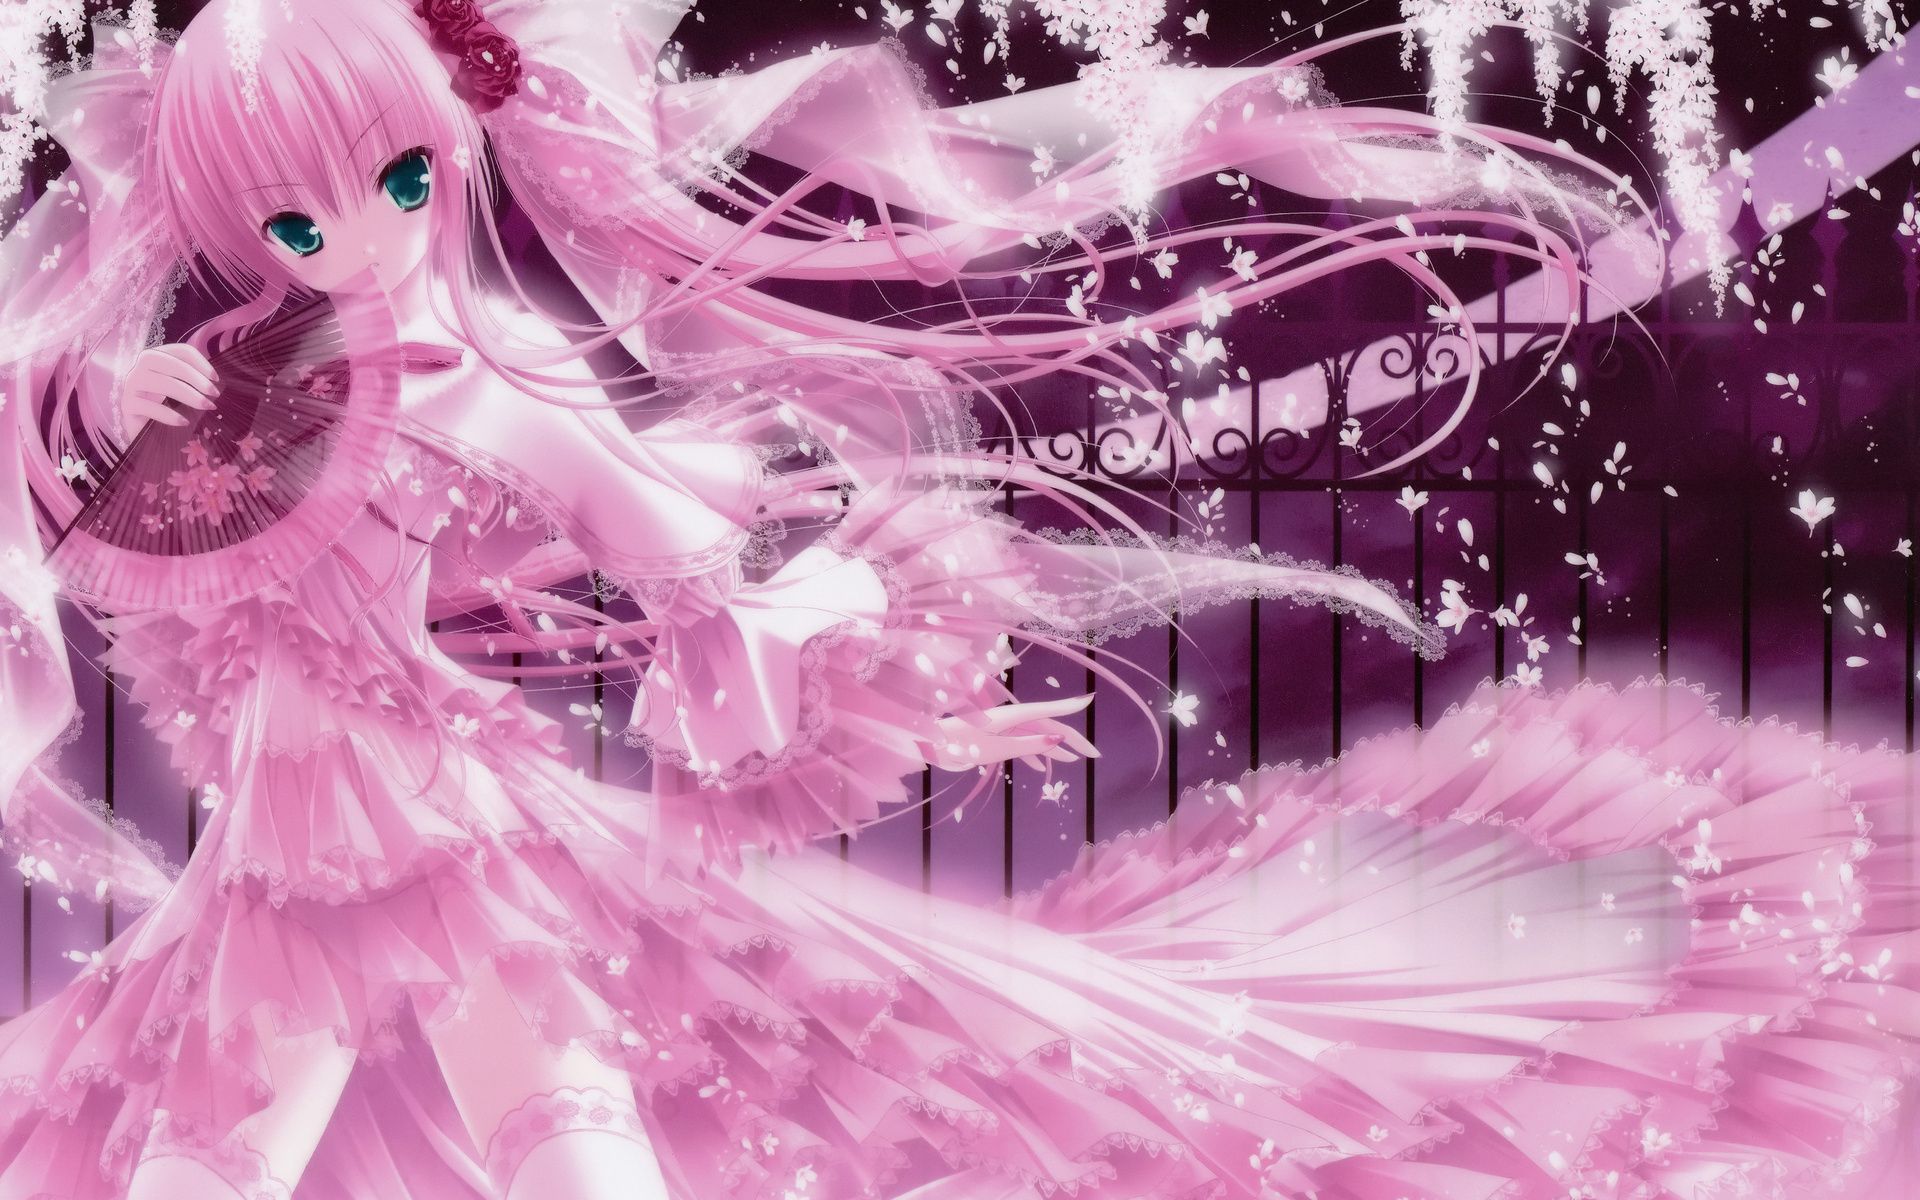 Anime girl in pink dress with long hair - Pink anime